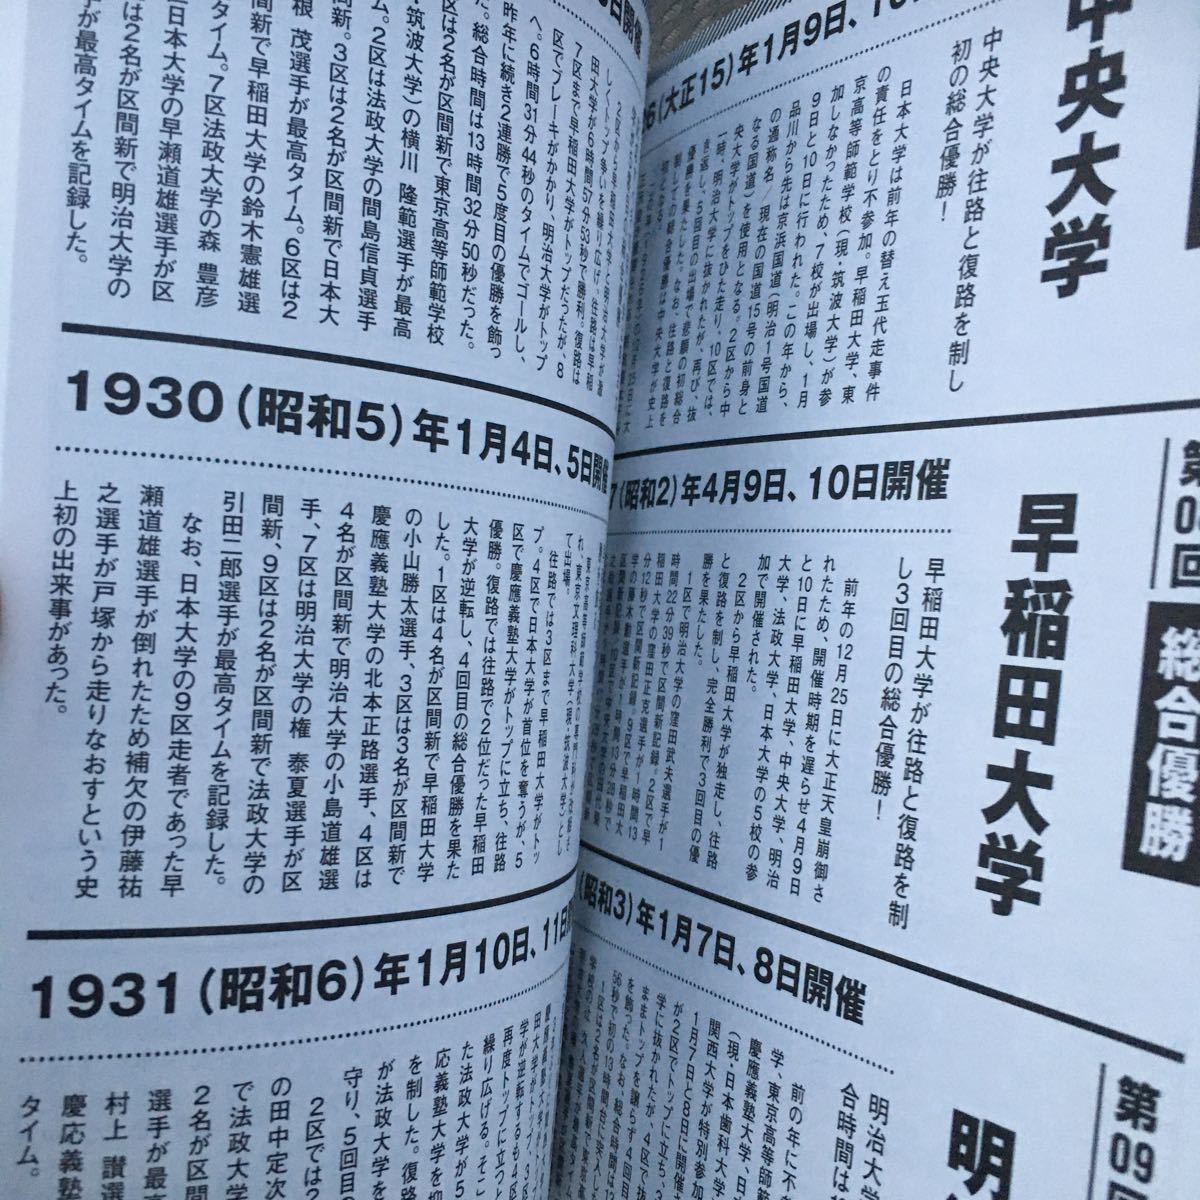 *book@ land [ university station .100 year. drama ] box root station . no. 1~94 times all record book all Japan university player right .. station . Aoyama .. Waseda .. day body large 